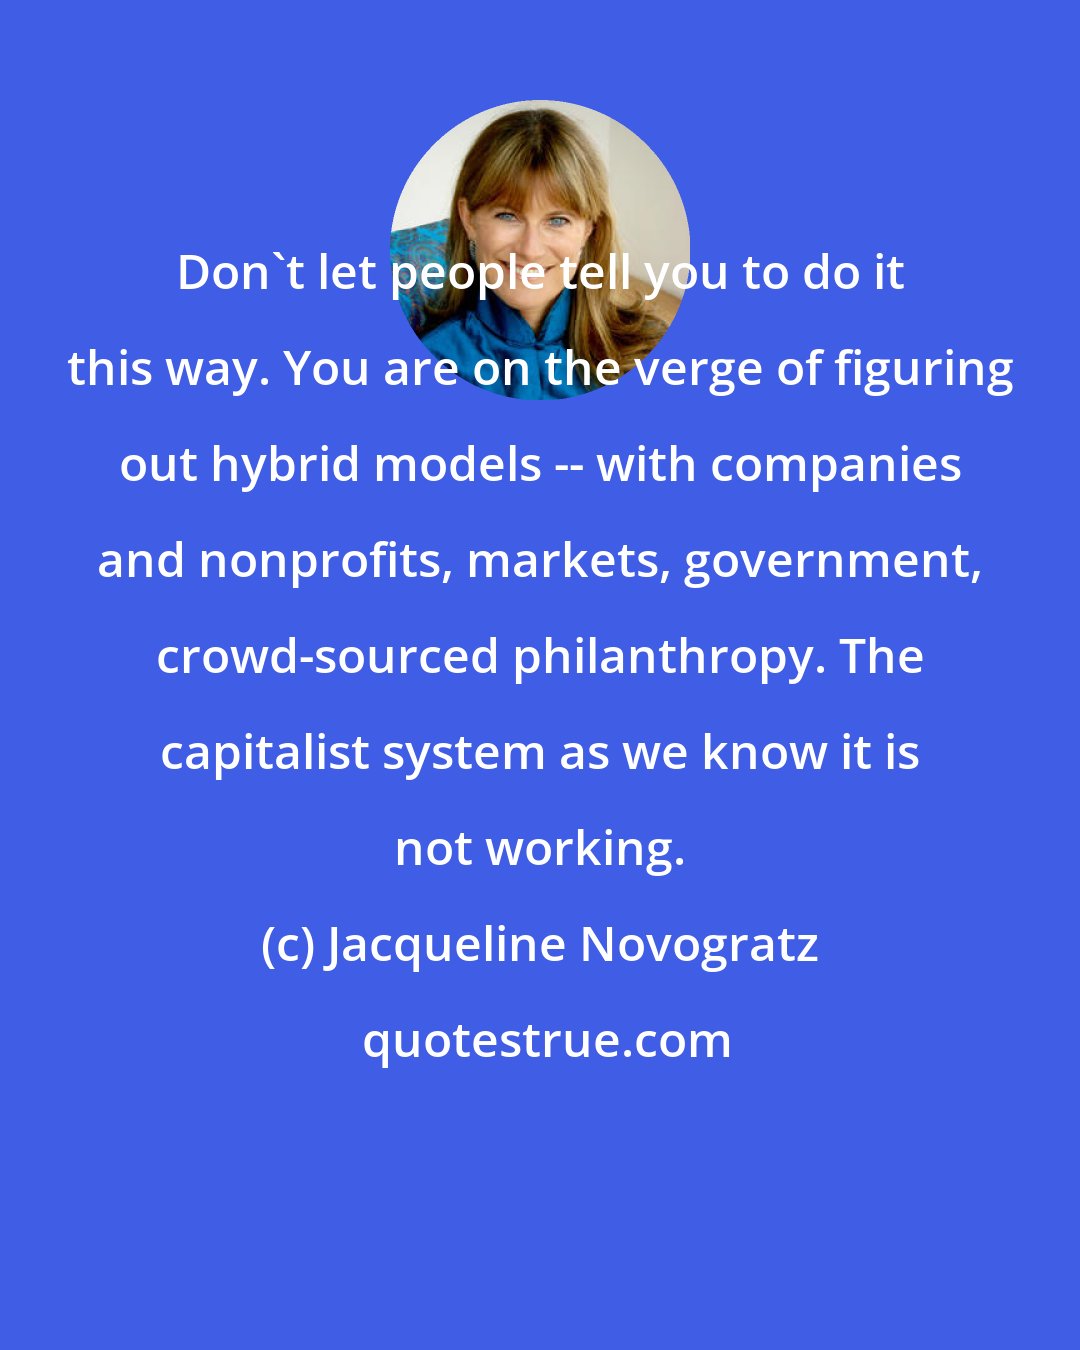 Jacqueline Novogratz: Don't let people tell you to do it this way. You are on the verge of figuring out hybrid models -- with companies and nonprofits, markets, government, crowd-sourced philanthropy. The capitalist system as we know it is not working.